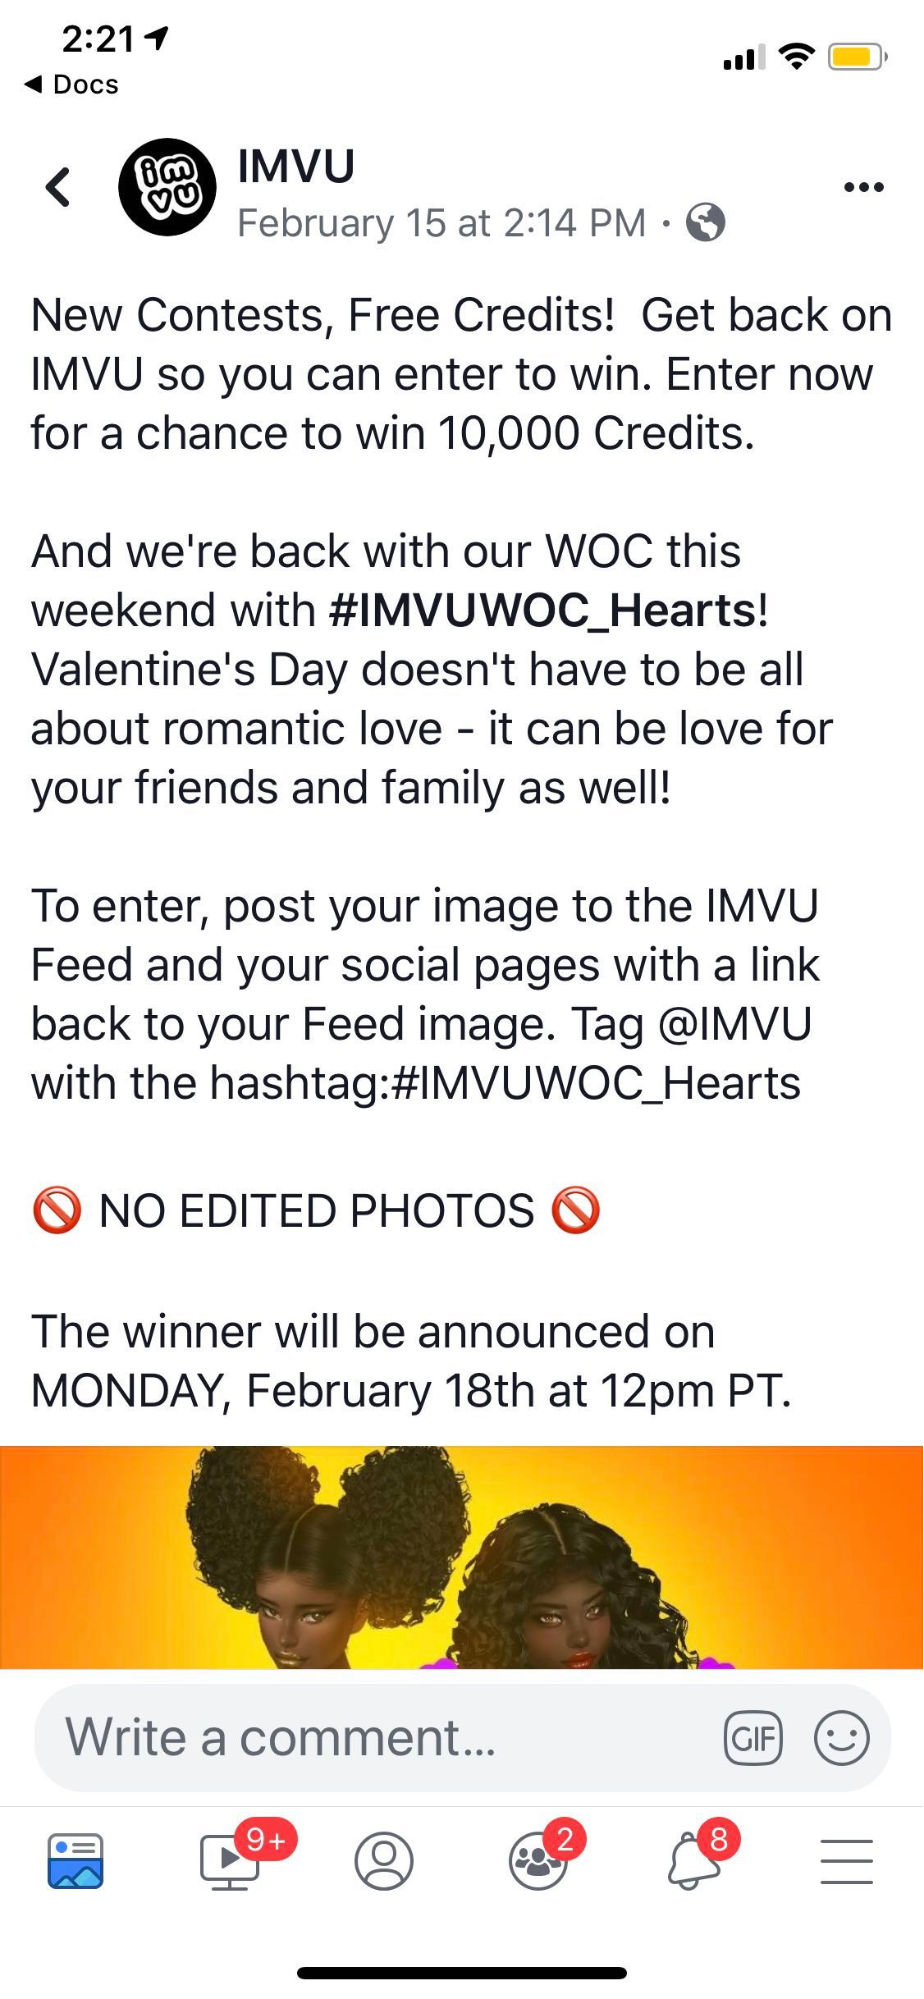 An example of the IMVU weekly contest Facebook ad